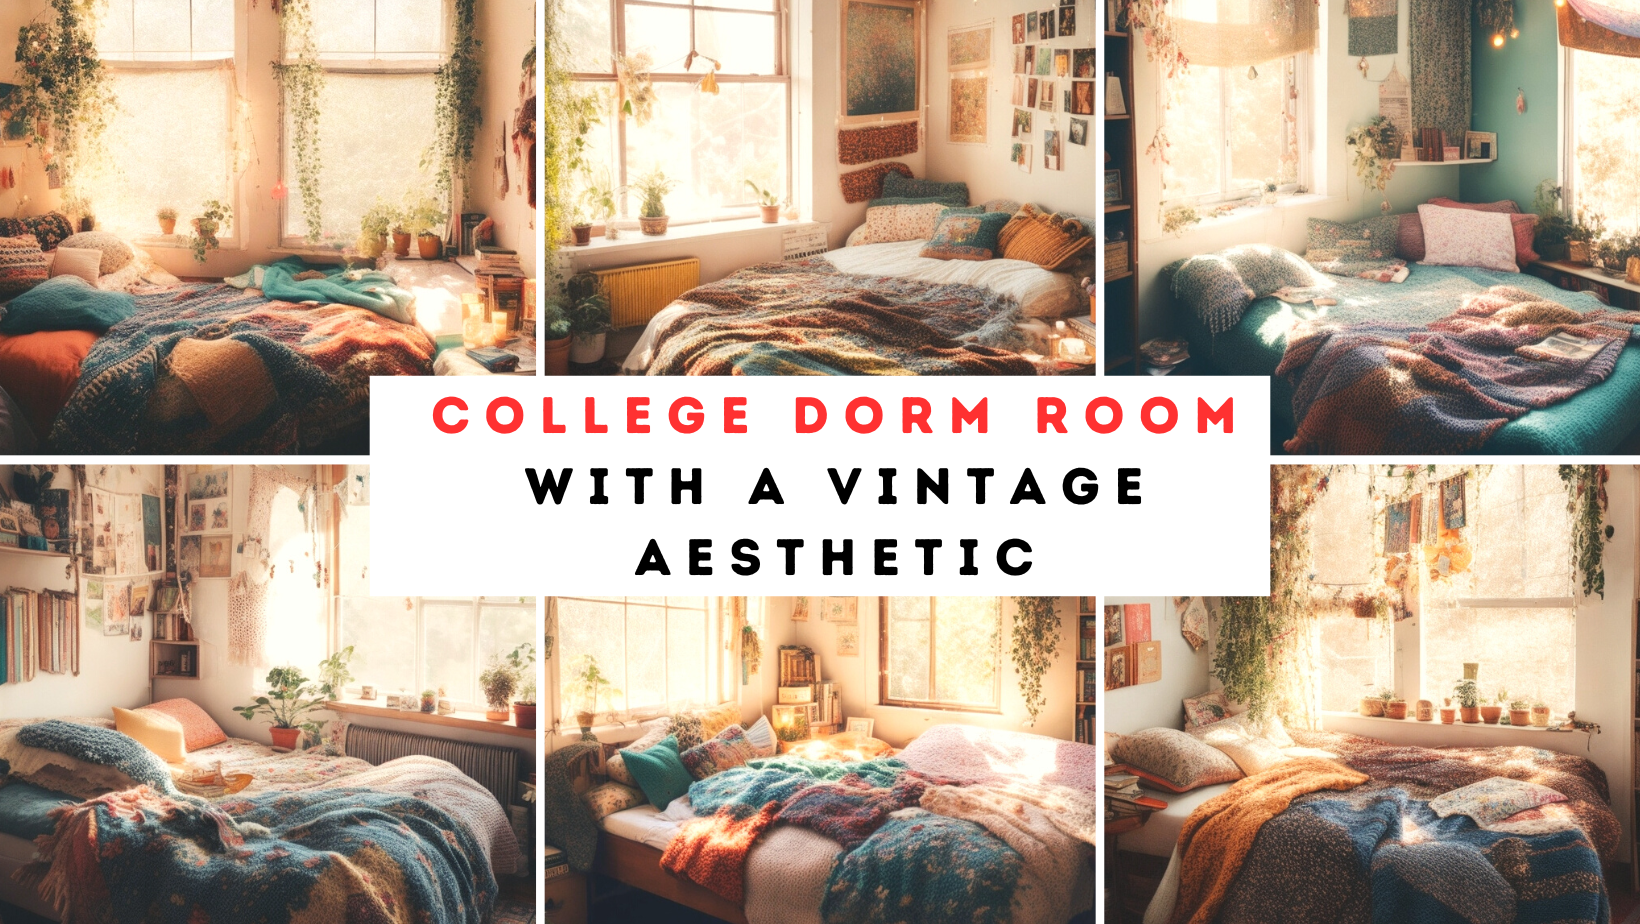 College Dorm Room with a Vintage Aesthetic